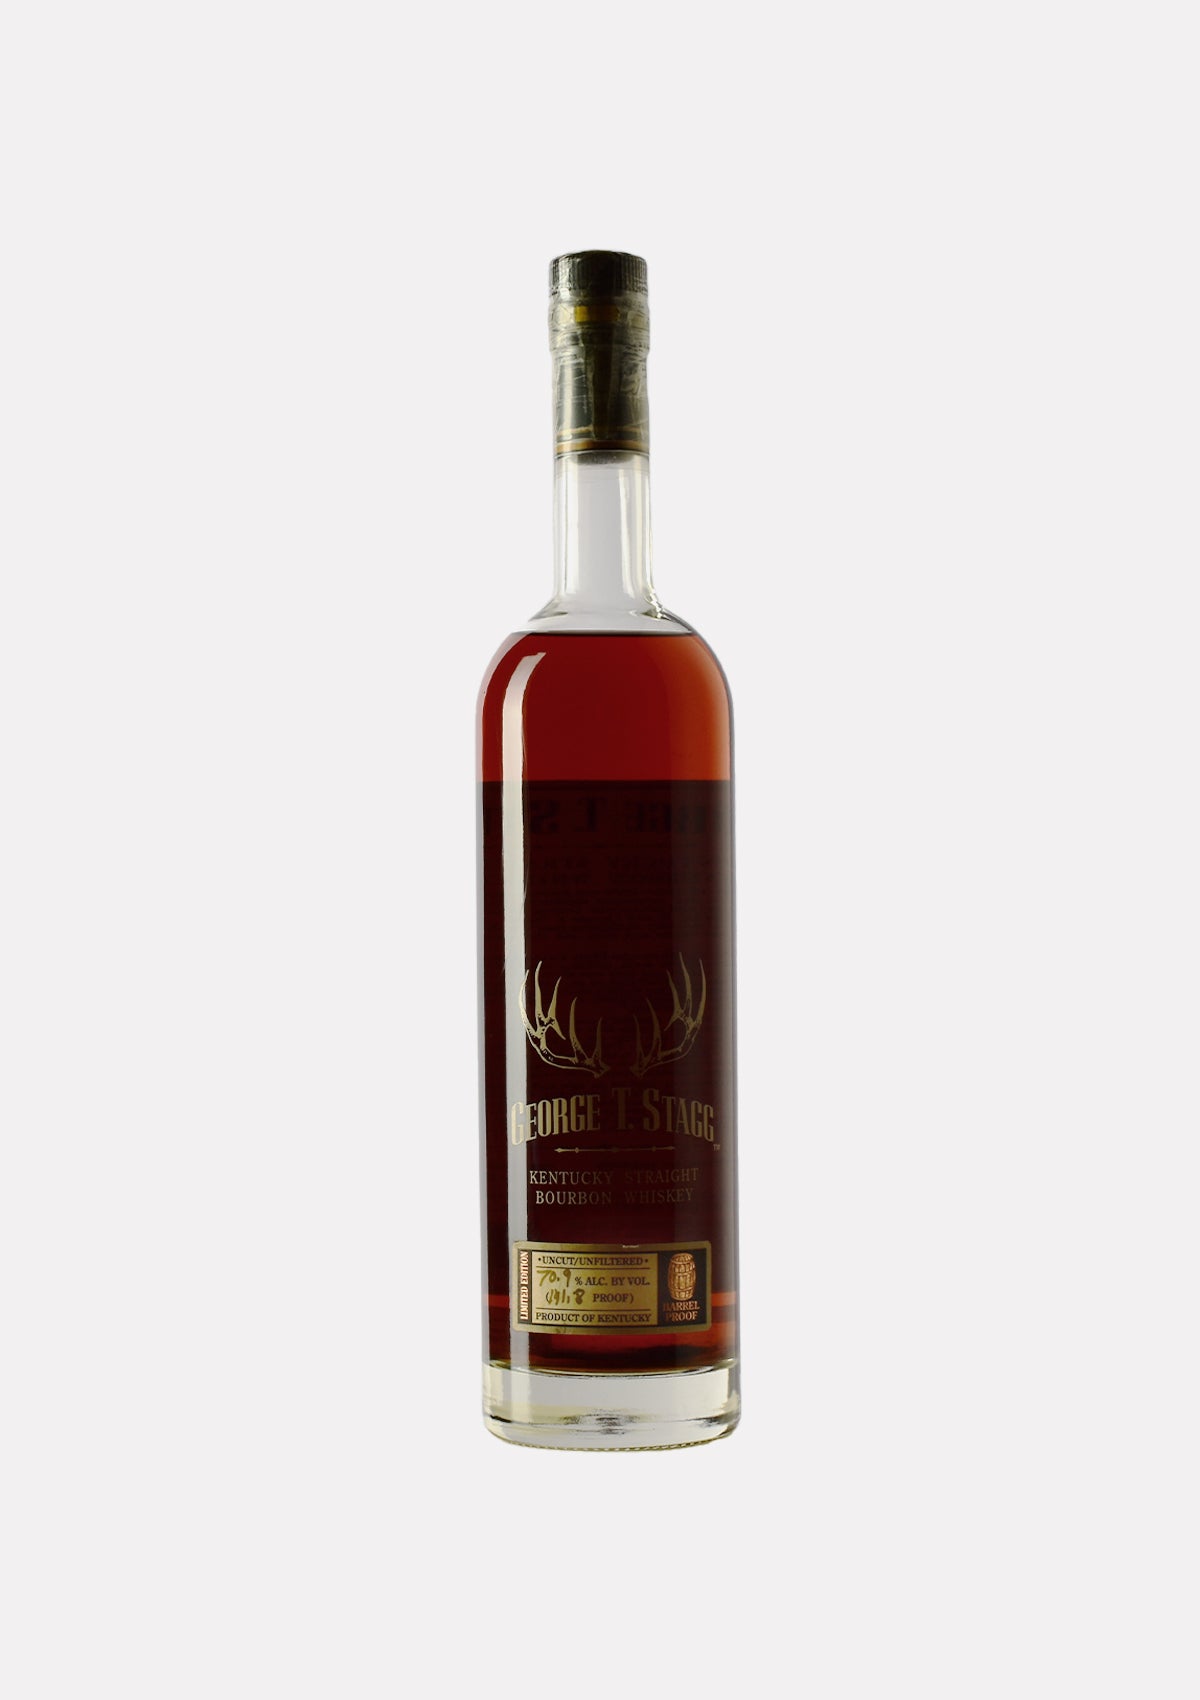 George T. Stagg Kentucky Straight Bourbon Whiskey 141.8 Proof